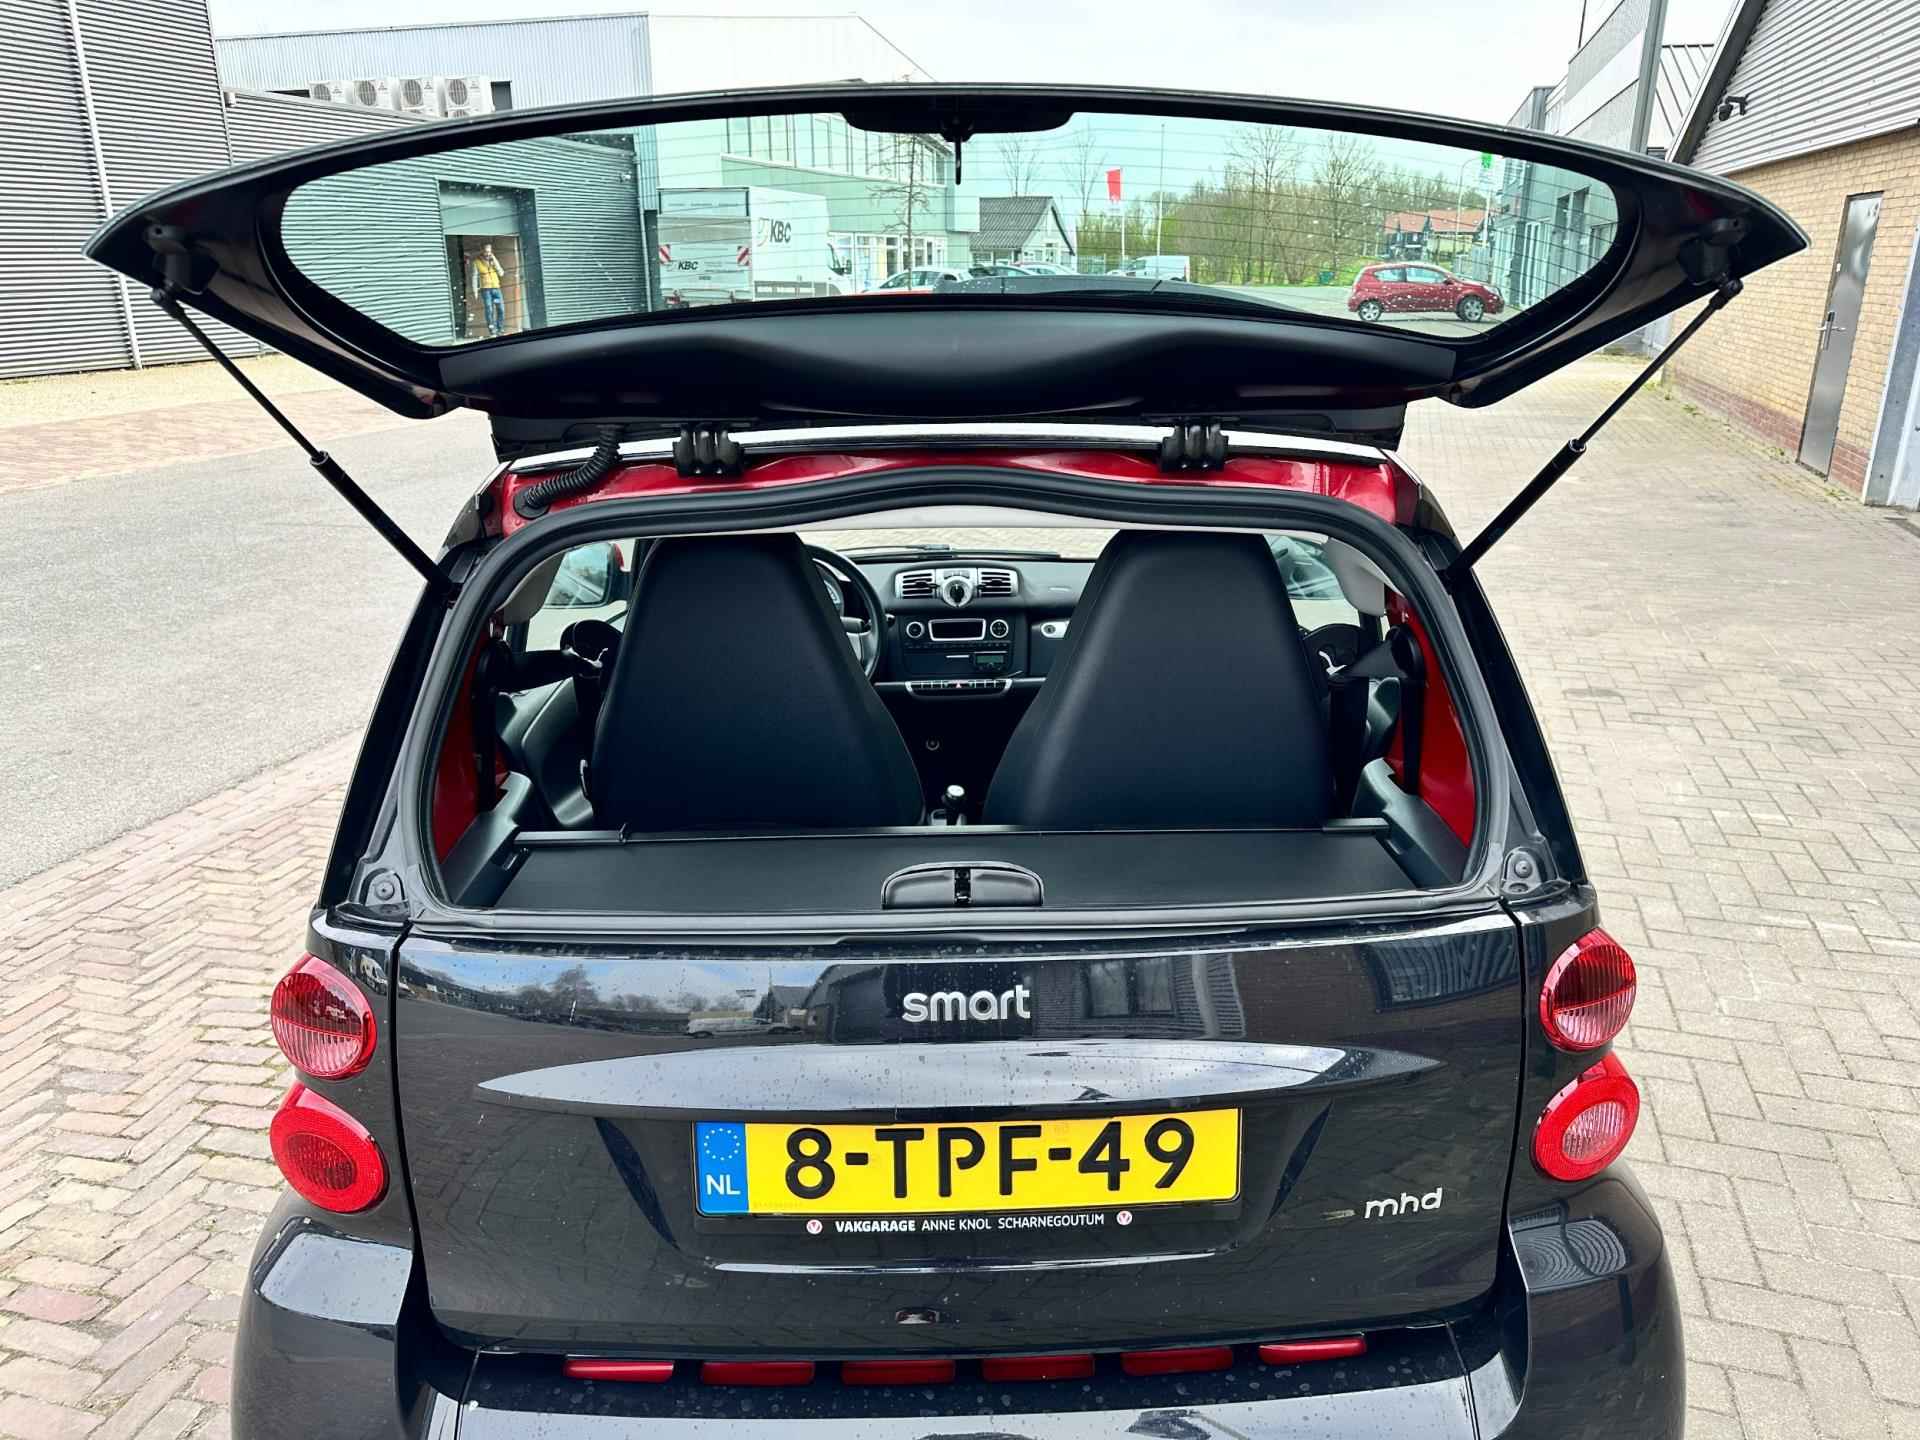 Smart Fortwo coupé 1.0 mhd Pure automaat - 22/23